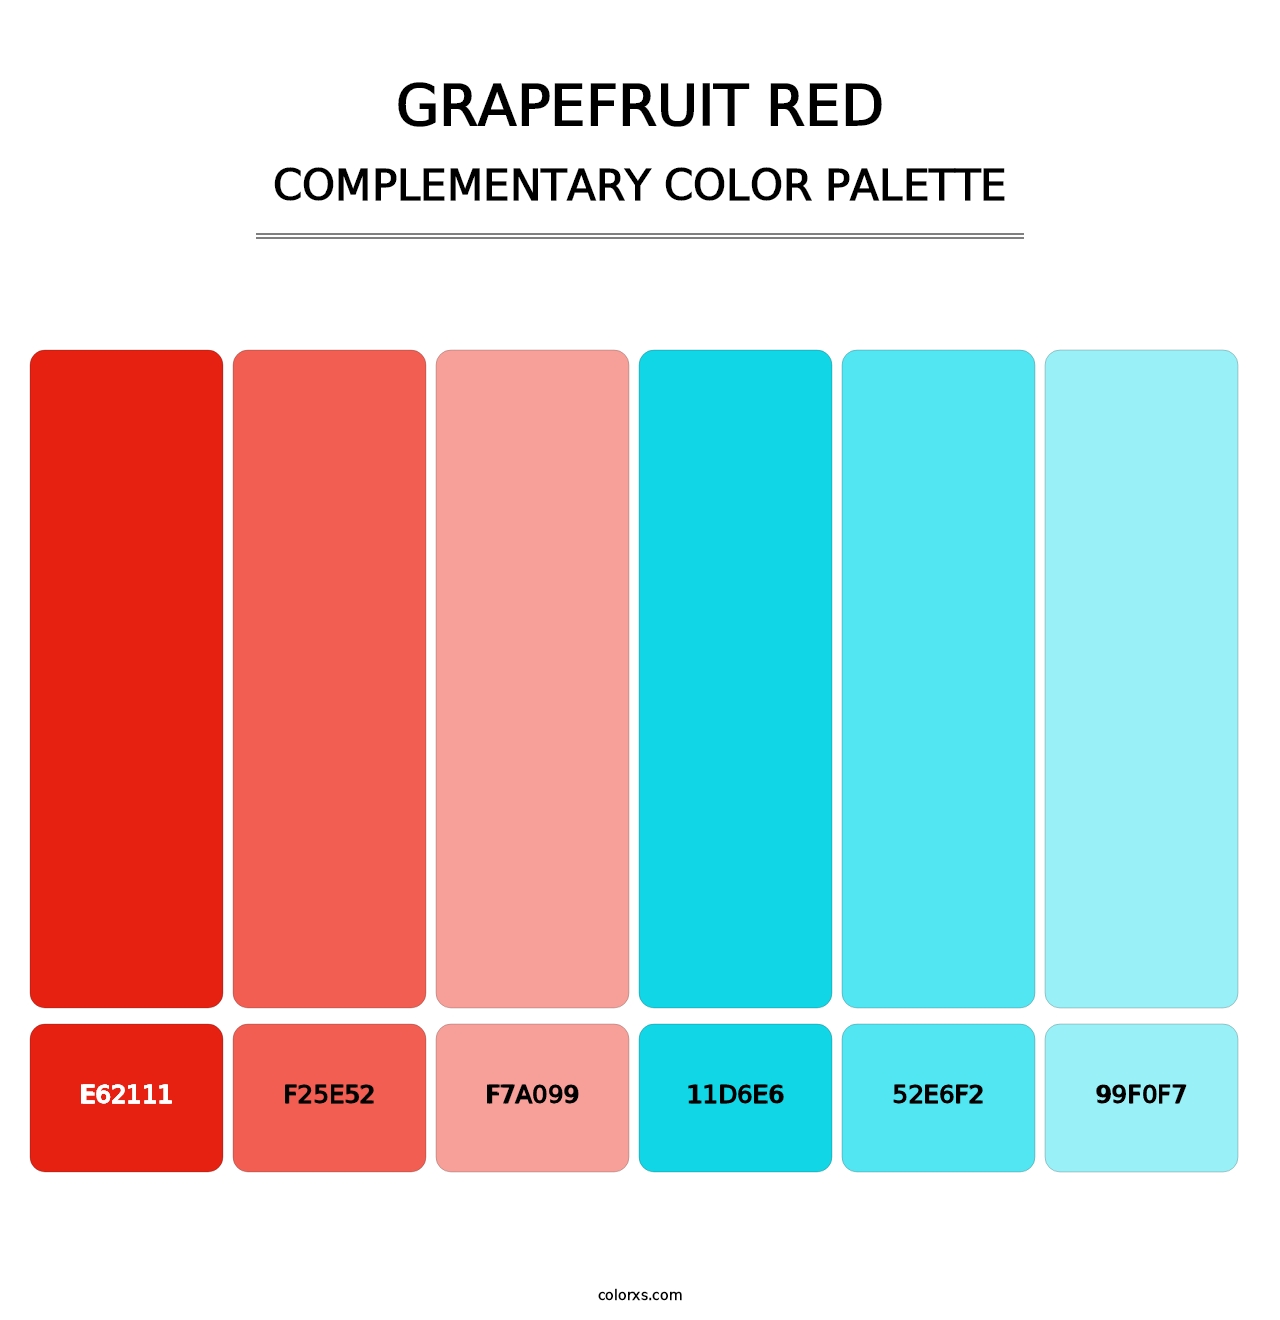 Grapefruit Red - Complementary Color Palette